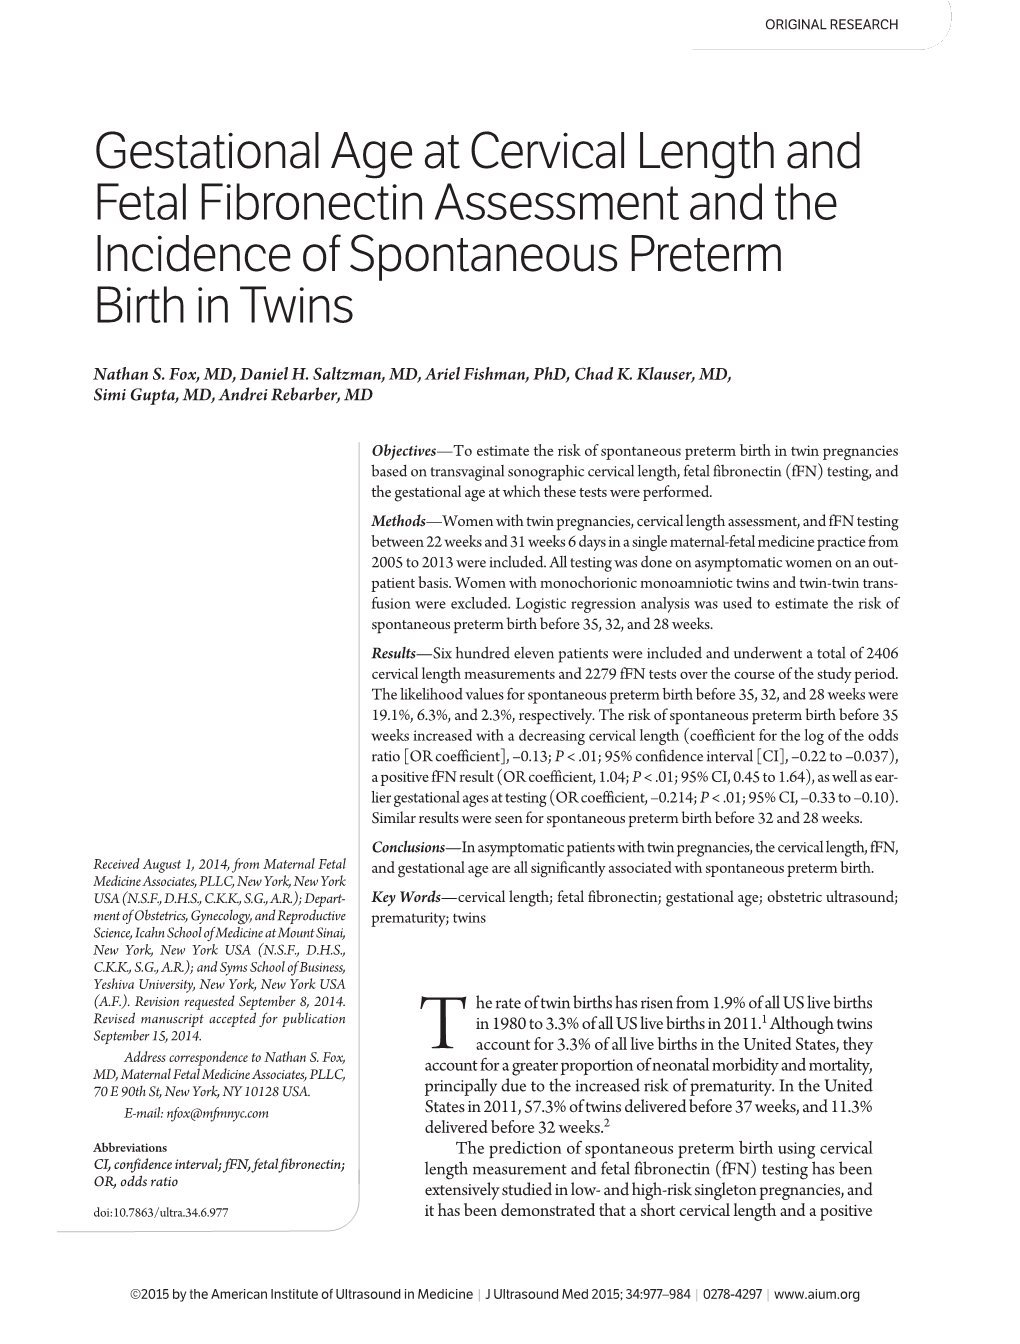 Gestational Age at Cervical Length and Fetal Fibronectin Assessment and the Incidence of Spontaneous Preterm Birth in Twins